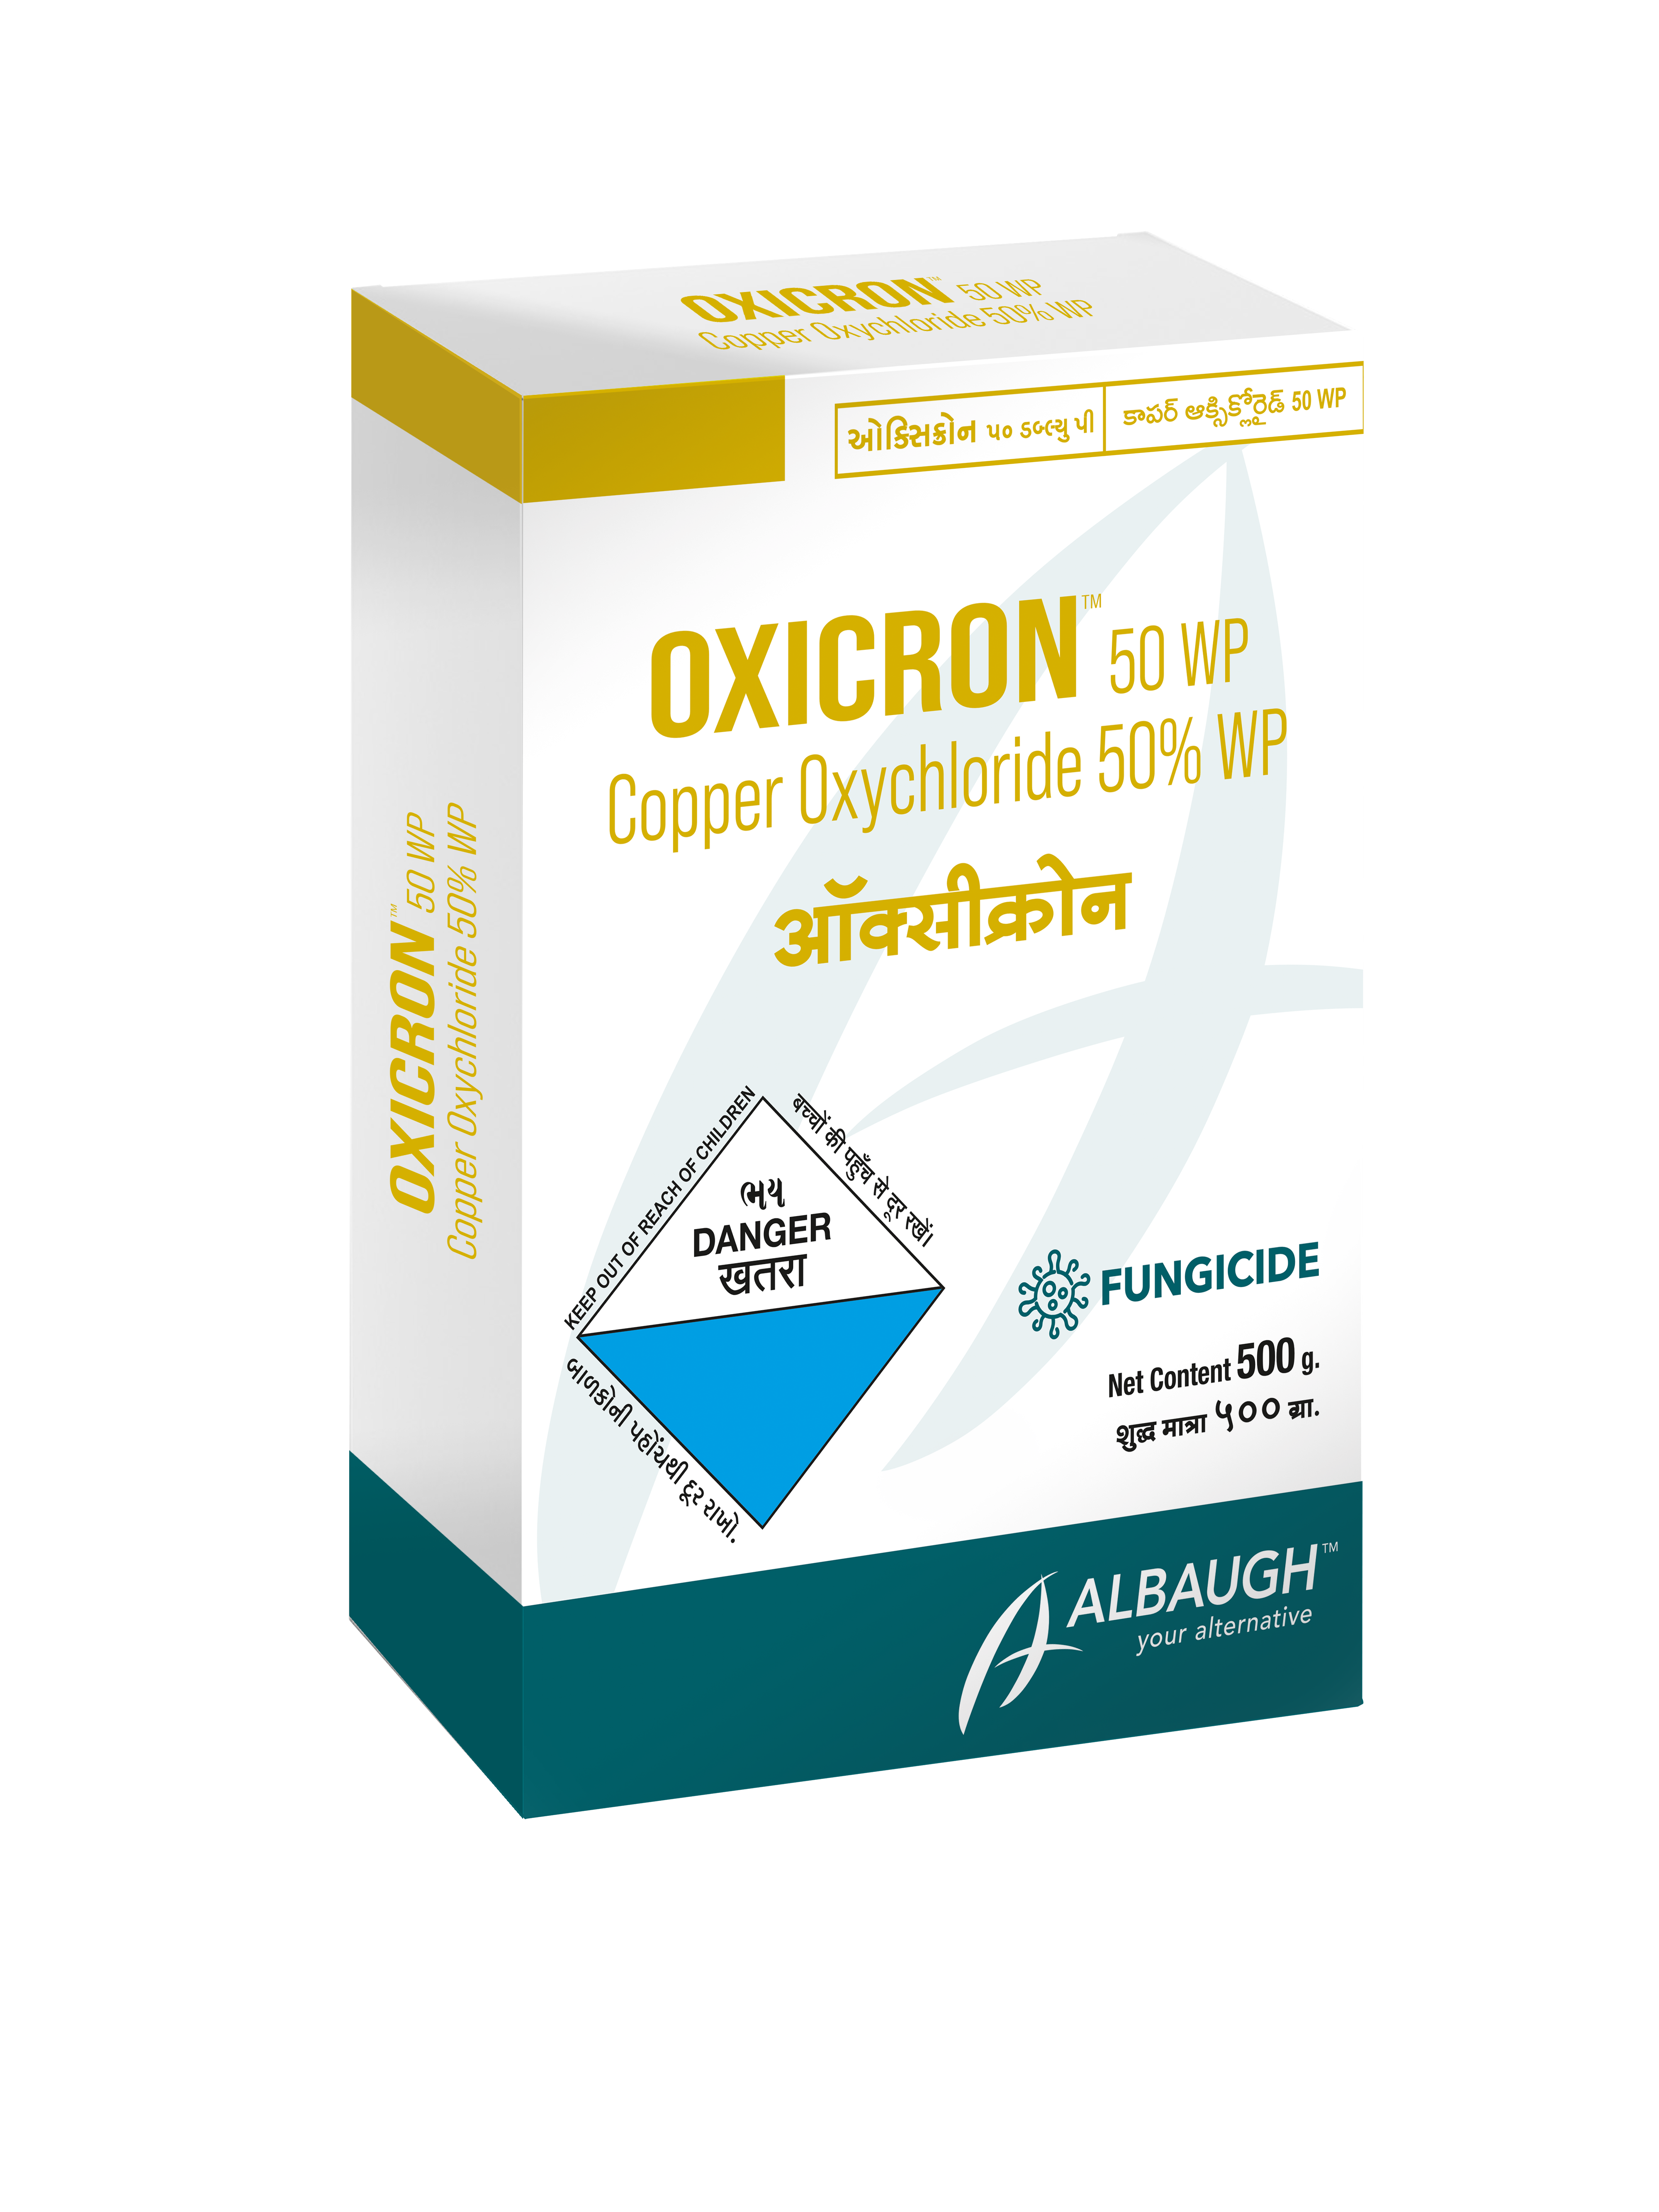 Oxicron: Copper Oxychloride 50% WP